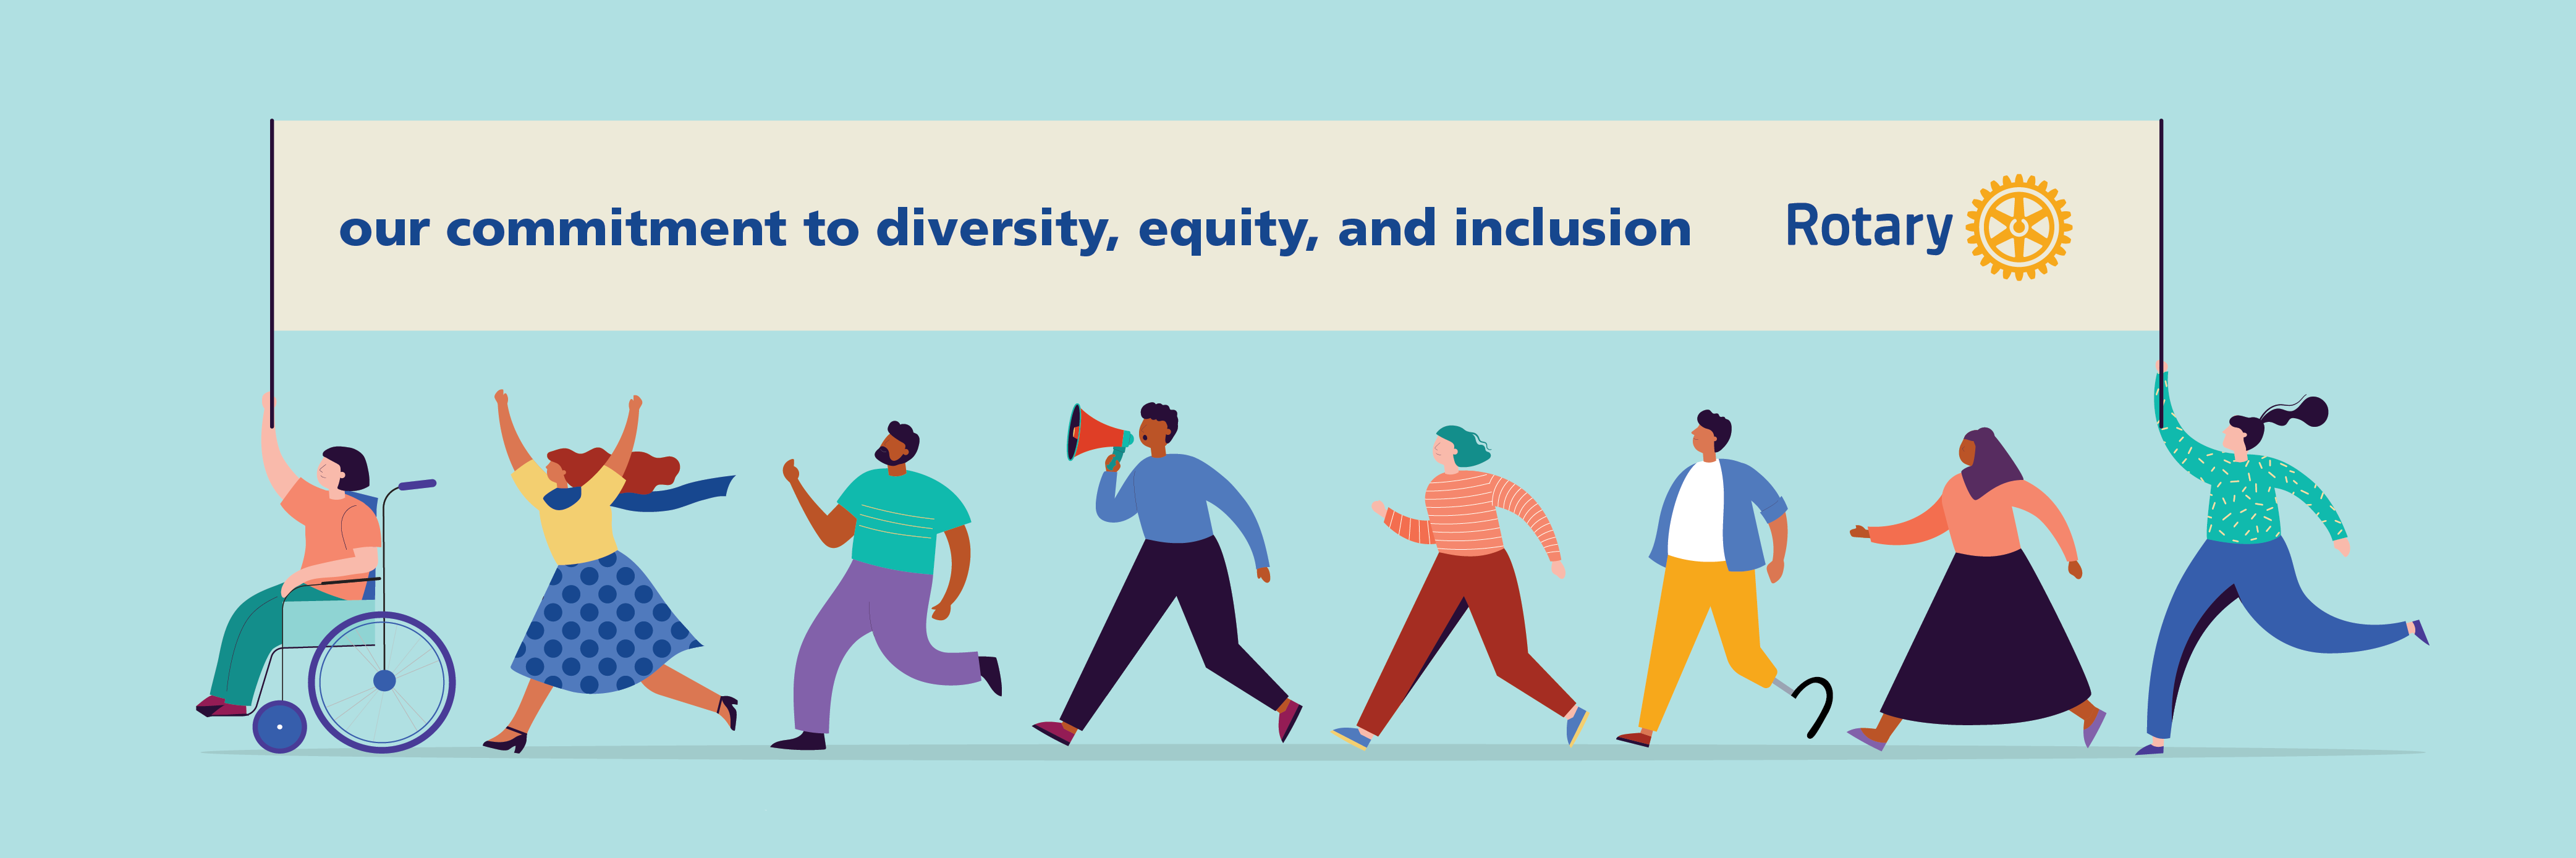 Rotary's Commitment to Diversity, Equity, and Inclusion | My Rotary